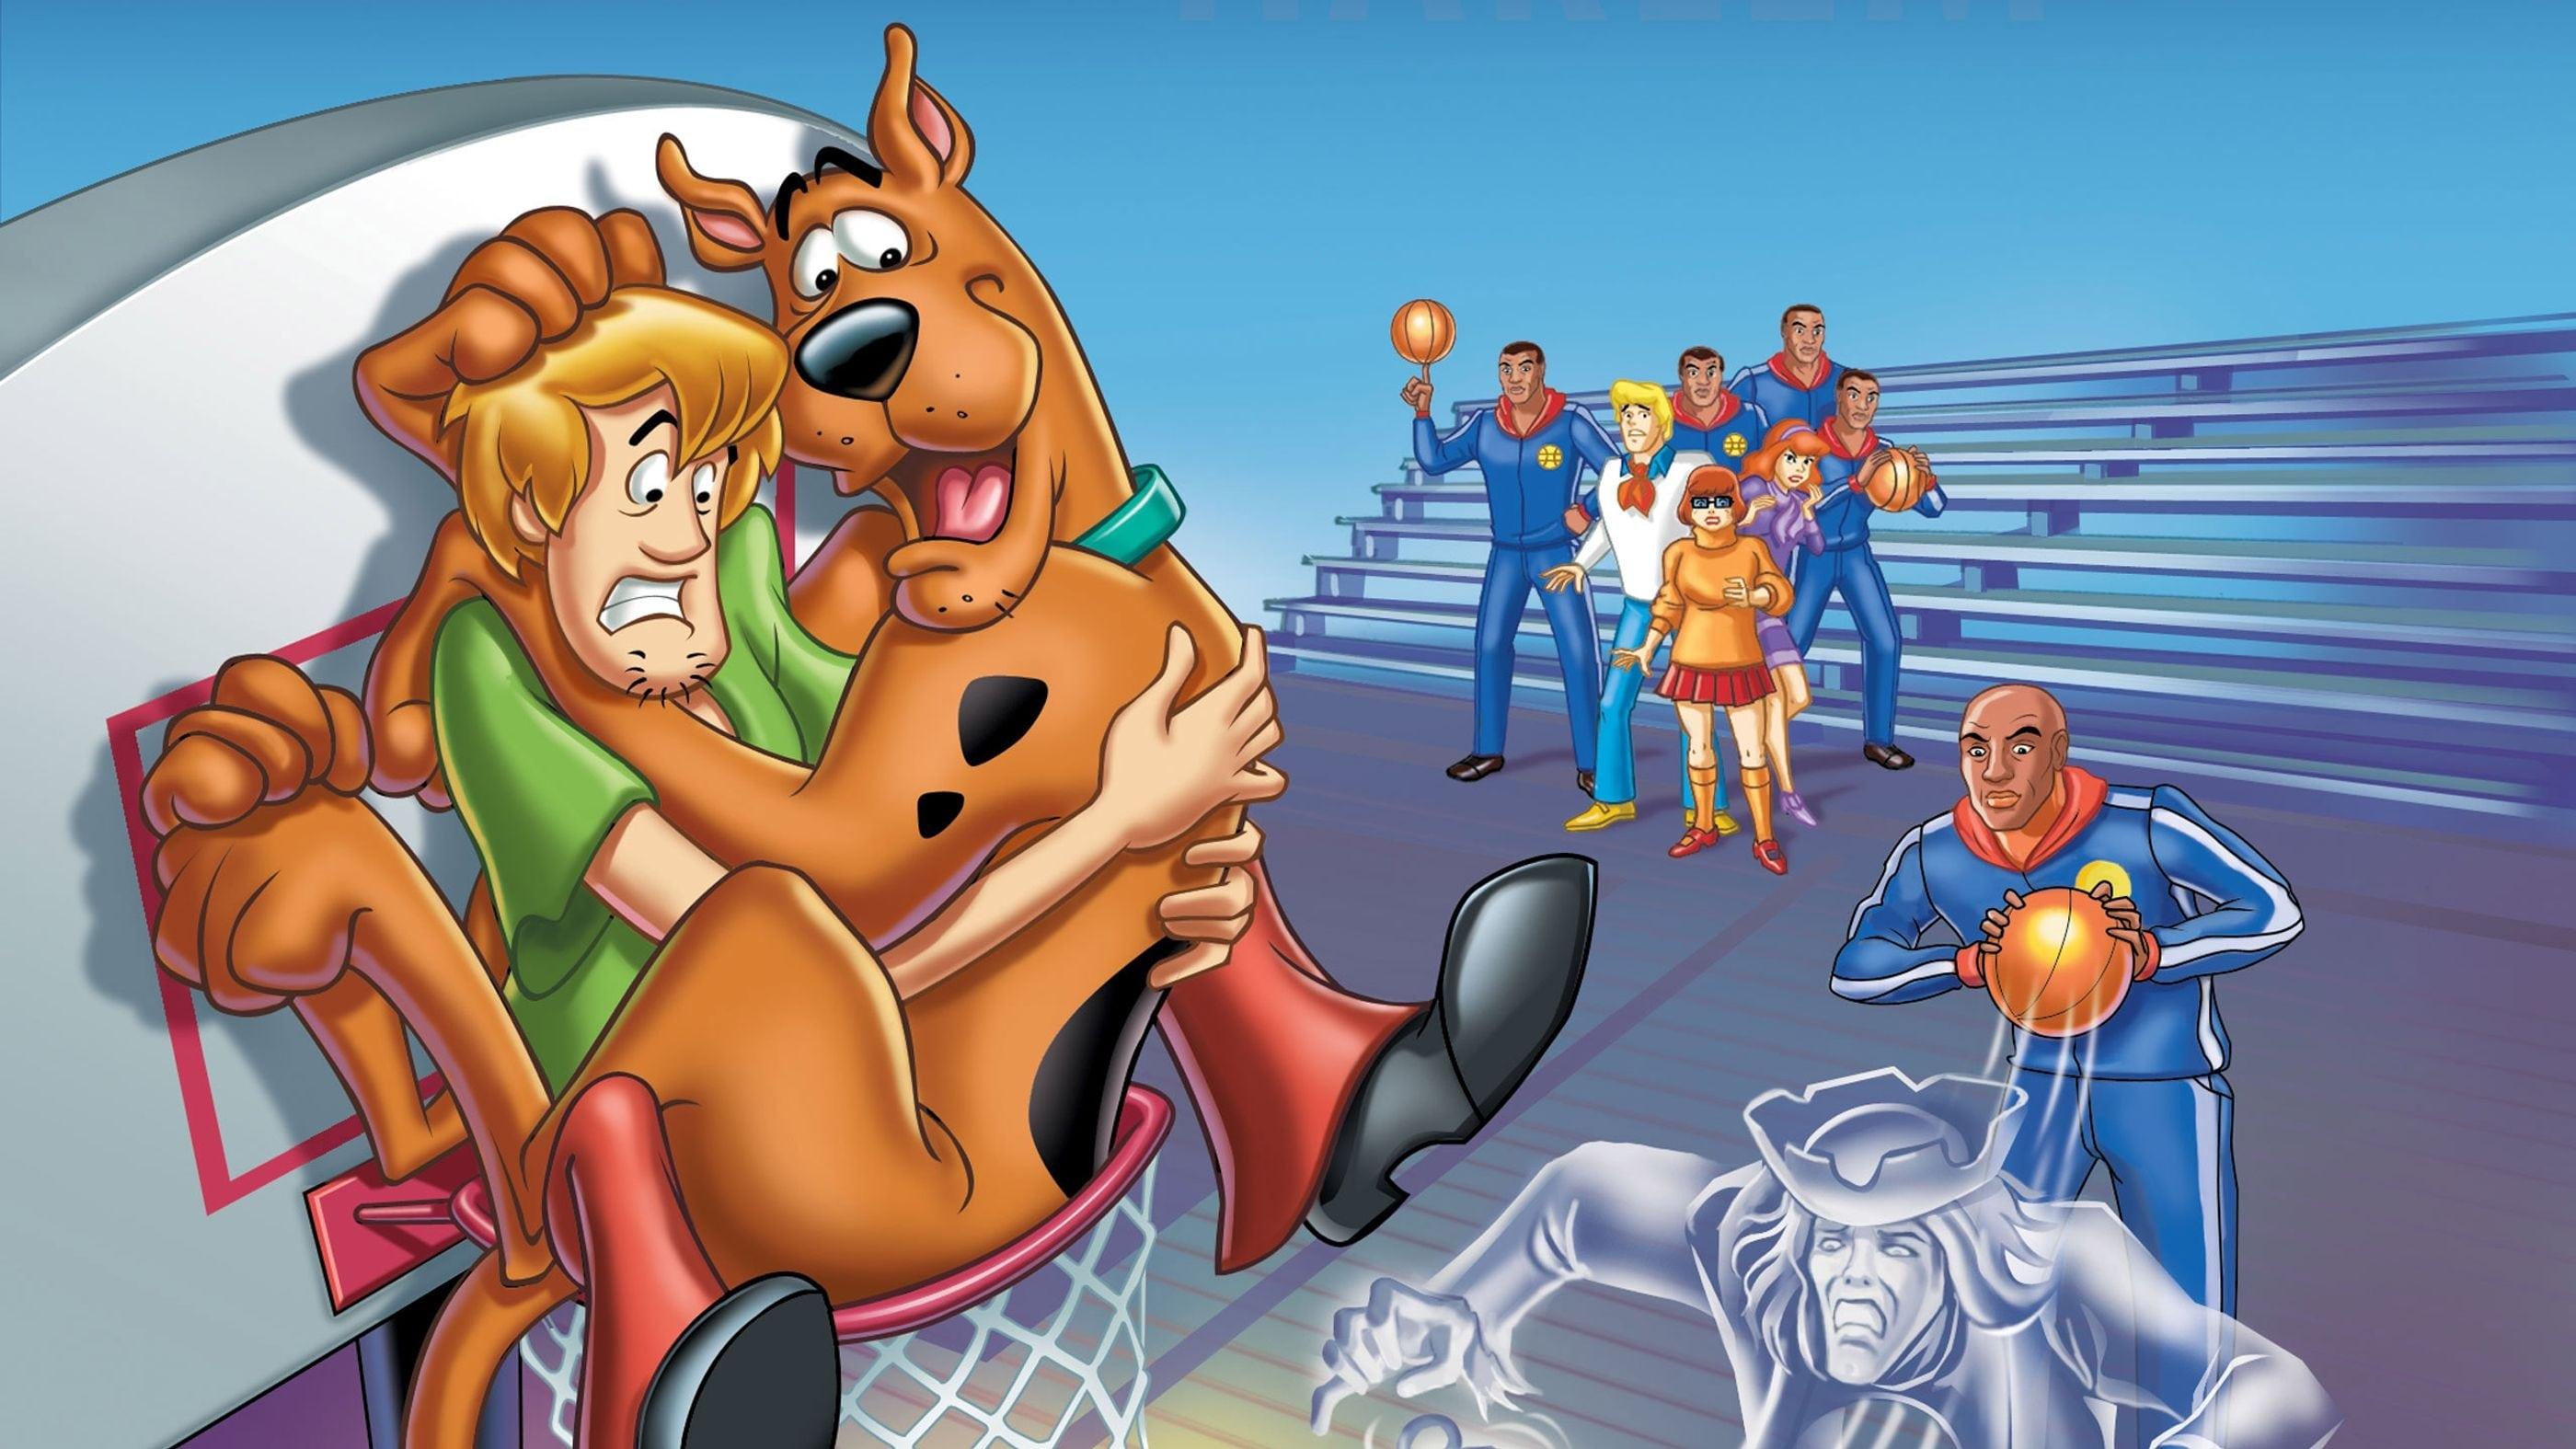 Scooby-Doo! Meets the Harlem Globetrotters backdrop